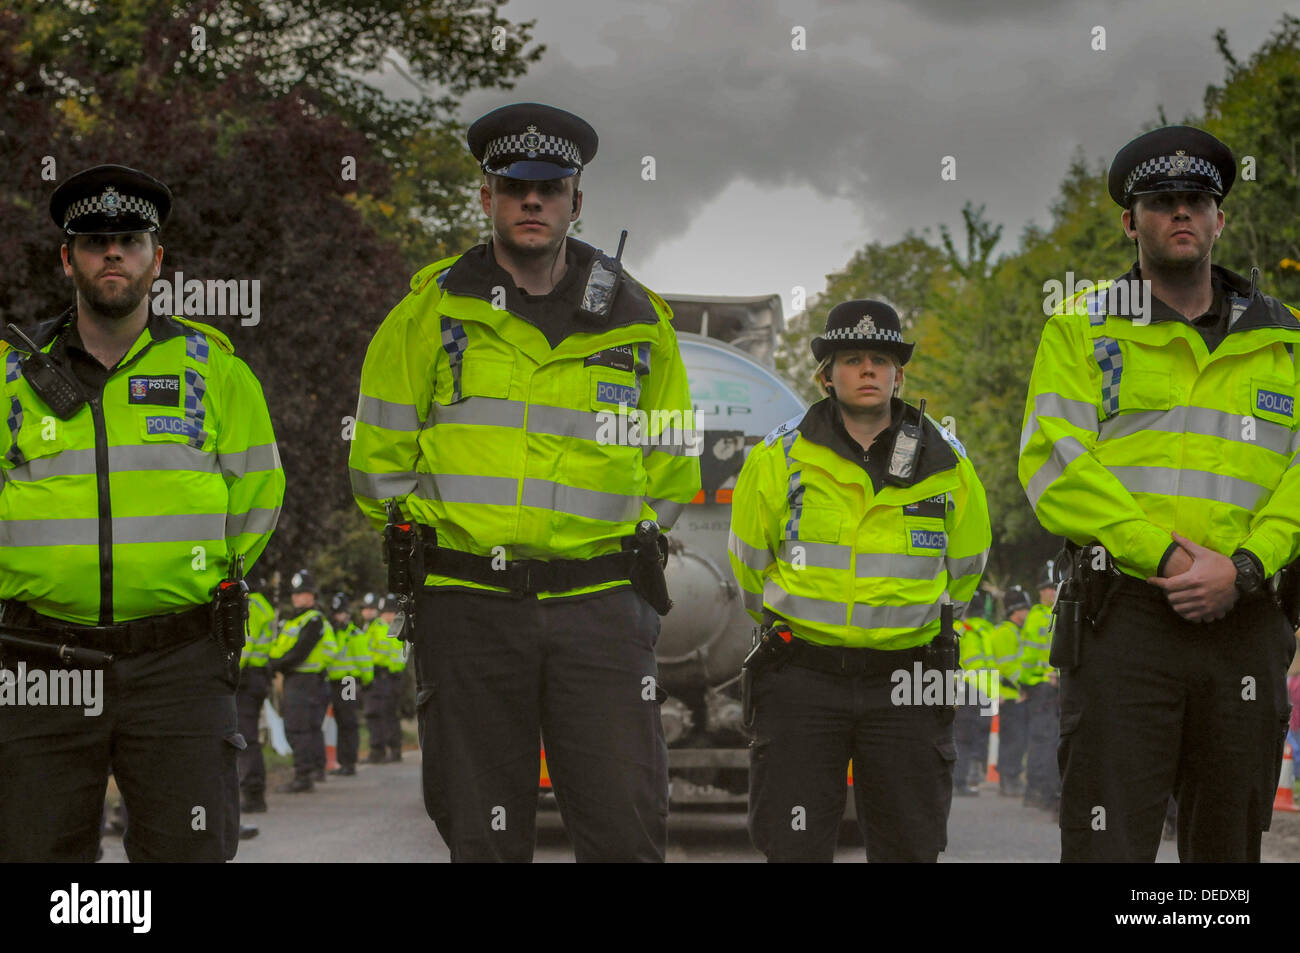 Balcombe, West Sussex, UK. 16th Sept, 2013. Cuadrilla tanker leaves the site surrounded by Police Officers who now outnumber protesters. Protesters lately have not seen to be disrupting Police in their duties and the atmosphere has been very relaxed and amicable.  Environmentalist rejoiced after todays failed attempt by West Sussex County  in the high court, due flawed case, to evict them from the road side camp. © David Burr/Alamy Live News Stock Photo